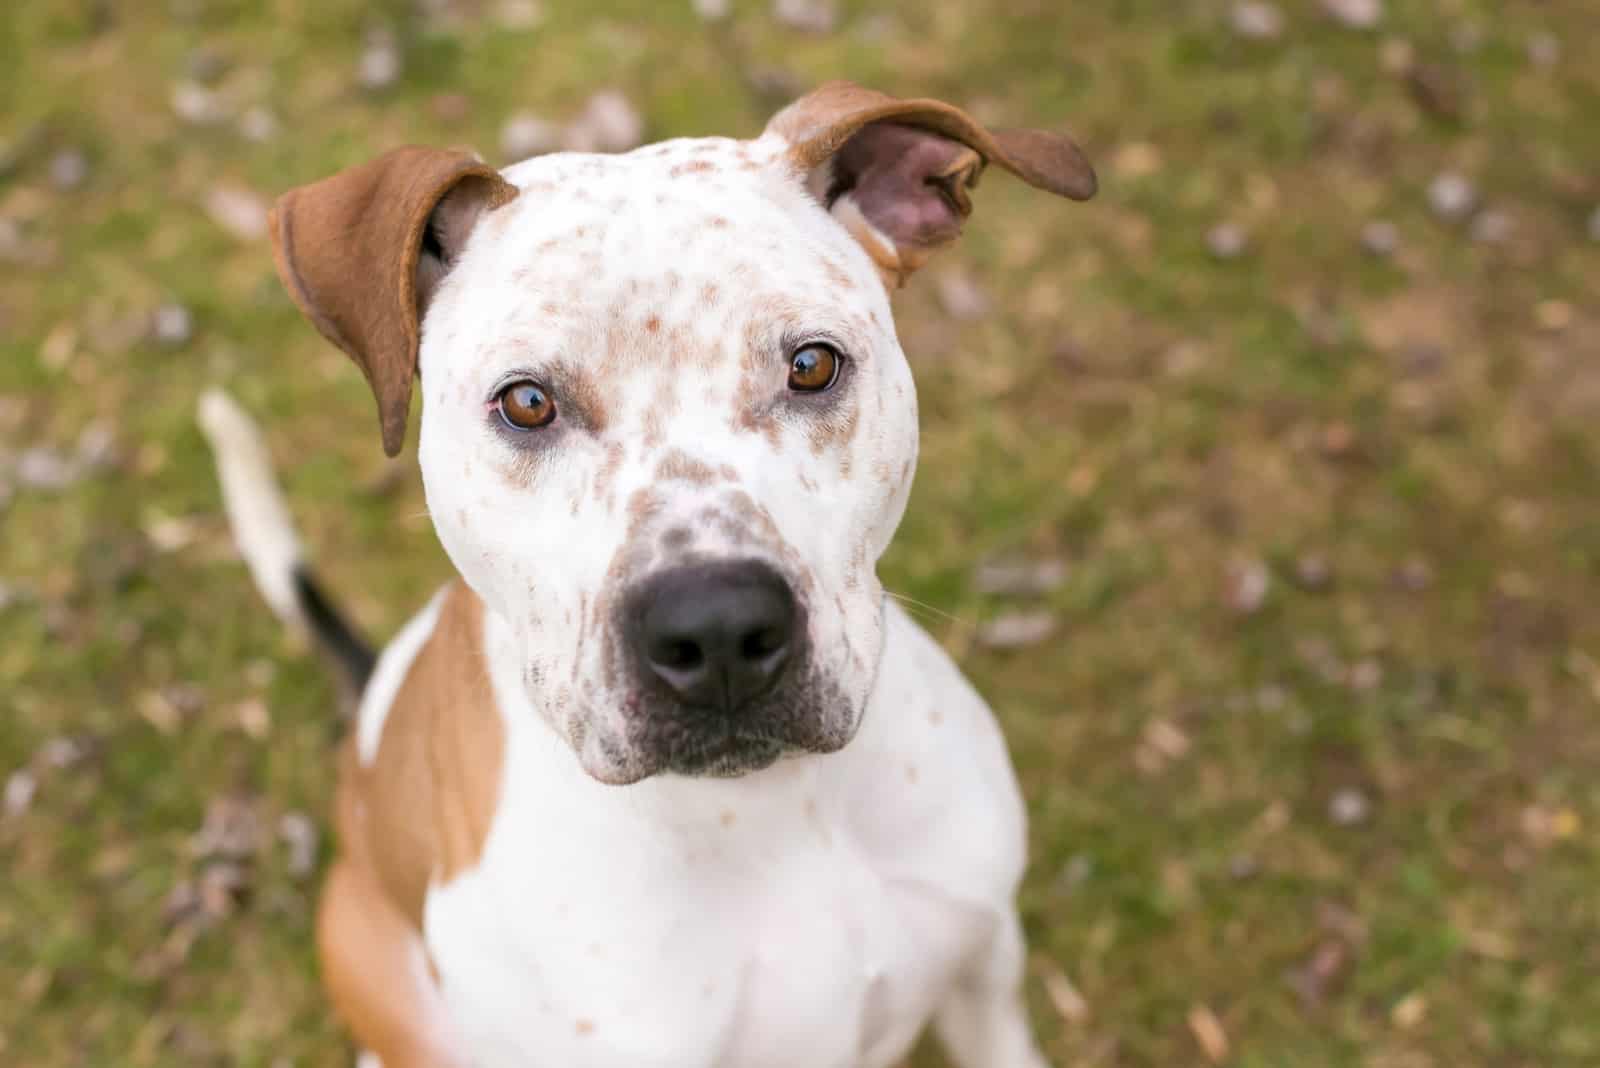 A Catahoula Leopard Dog x Pit Bull Terrier mixed breed dog with freckles on its face and floppy ears